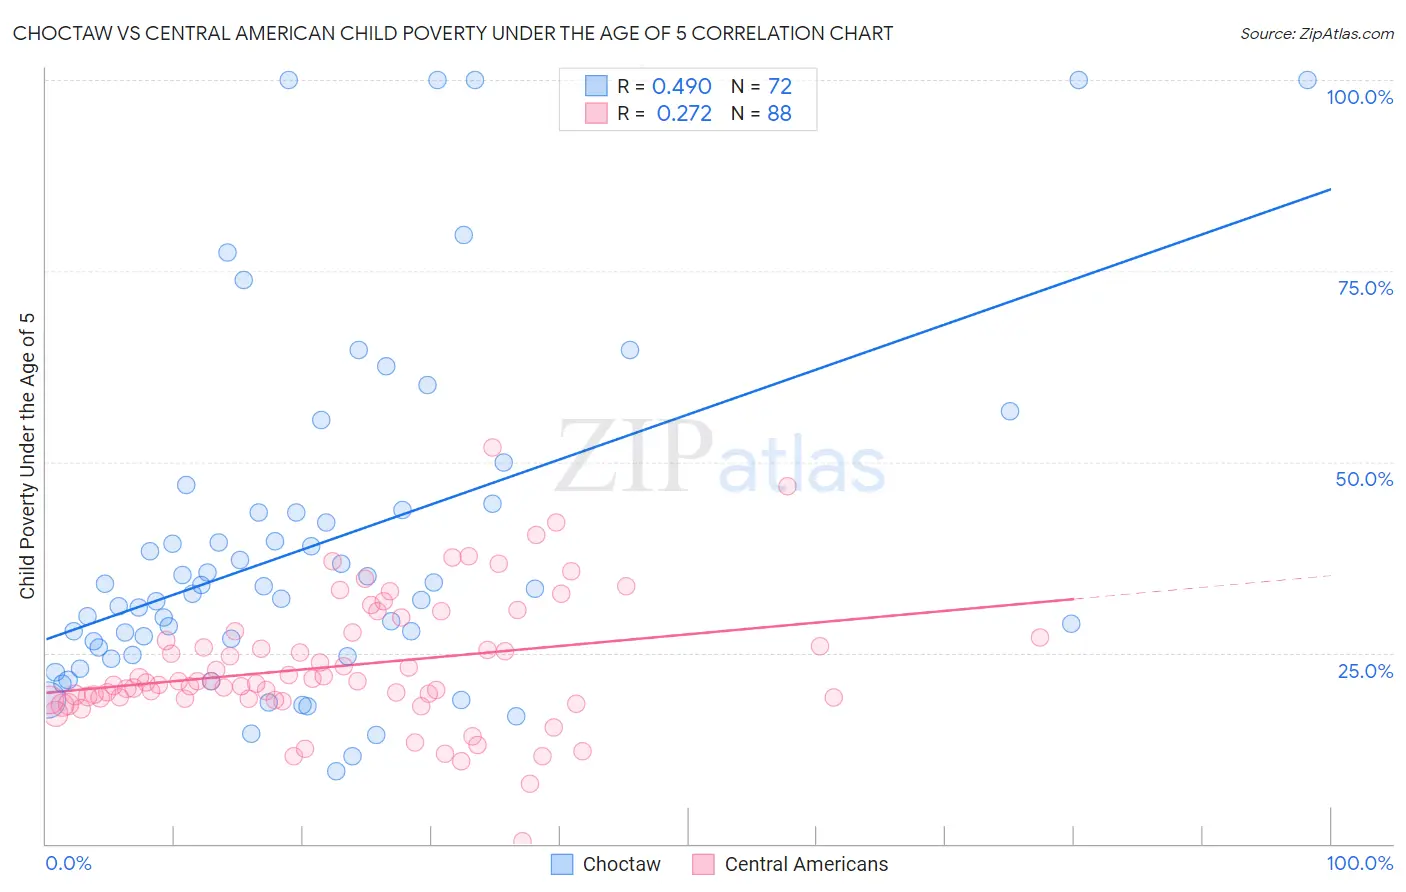 Choctaw vs Central American Child Poverty Under the Age of 5